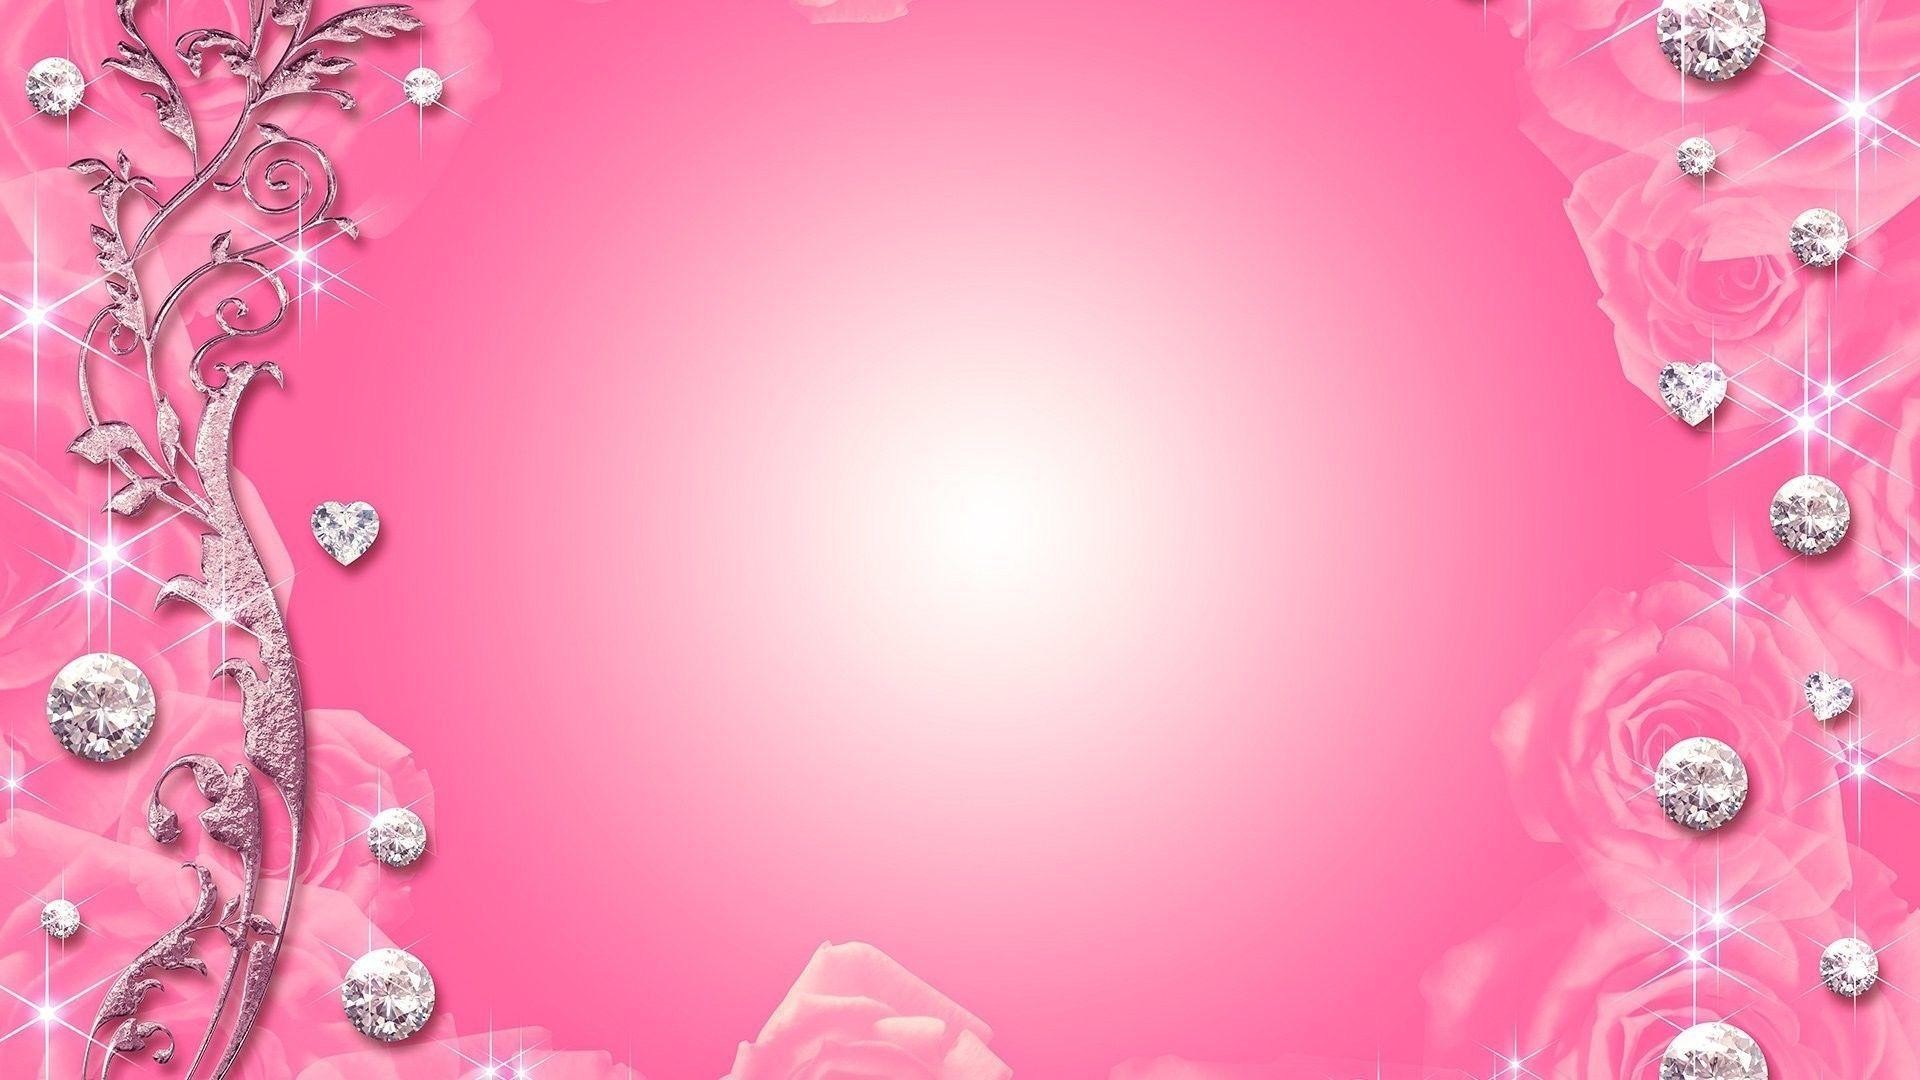 1920x1080 Wallpapers For > Cute Pink Backgrounds